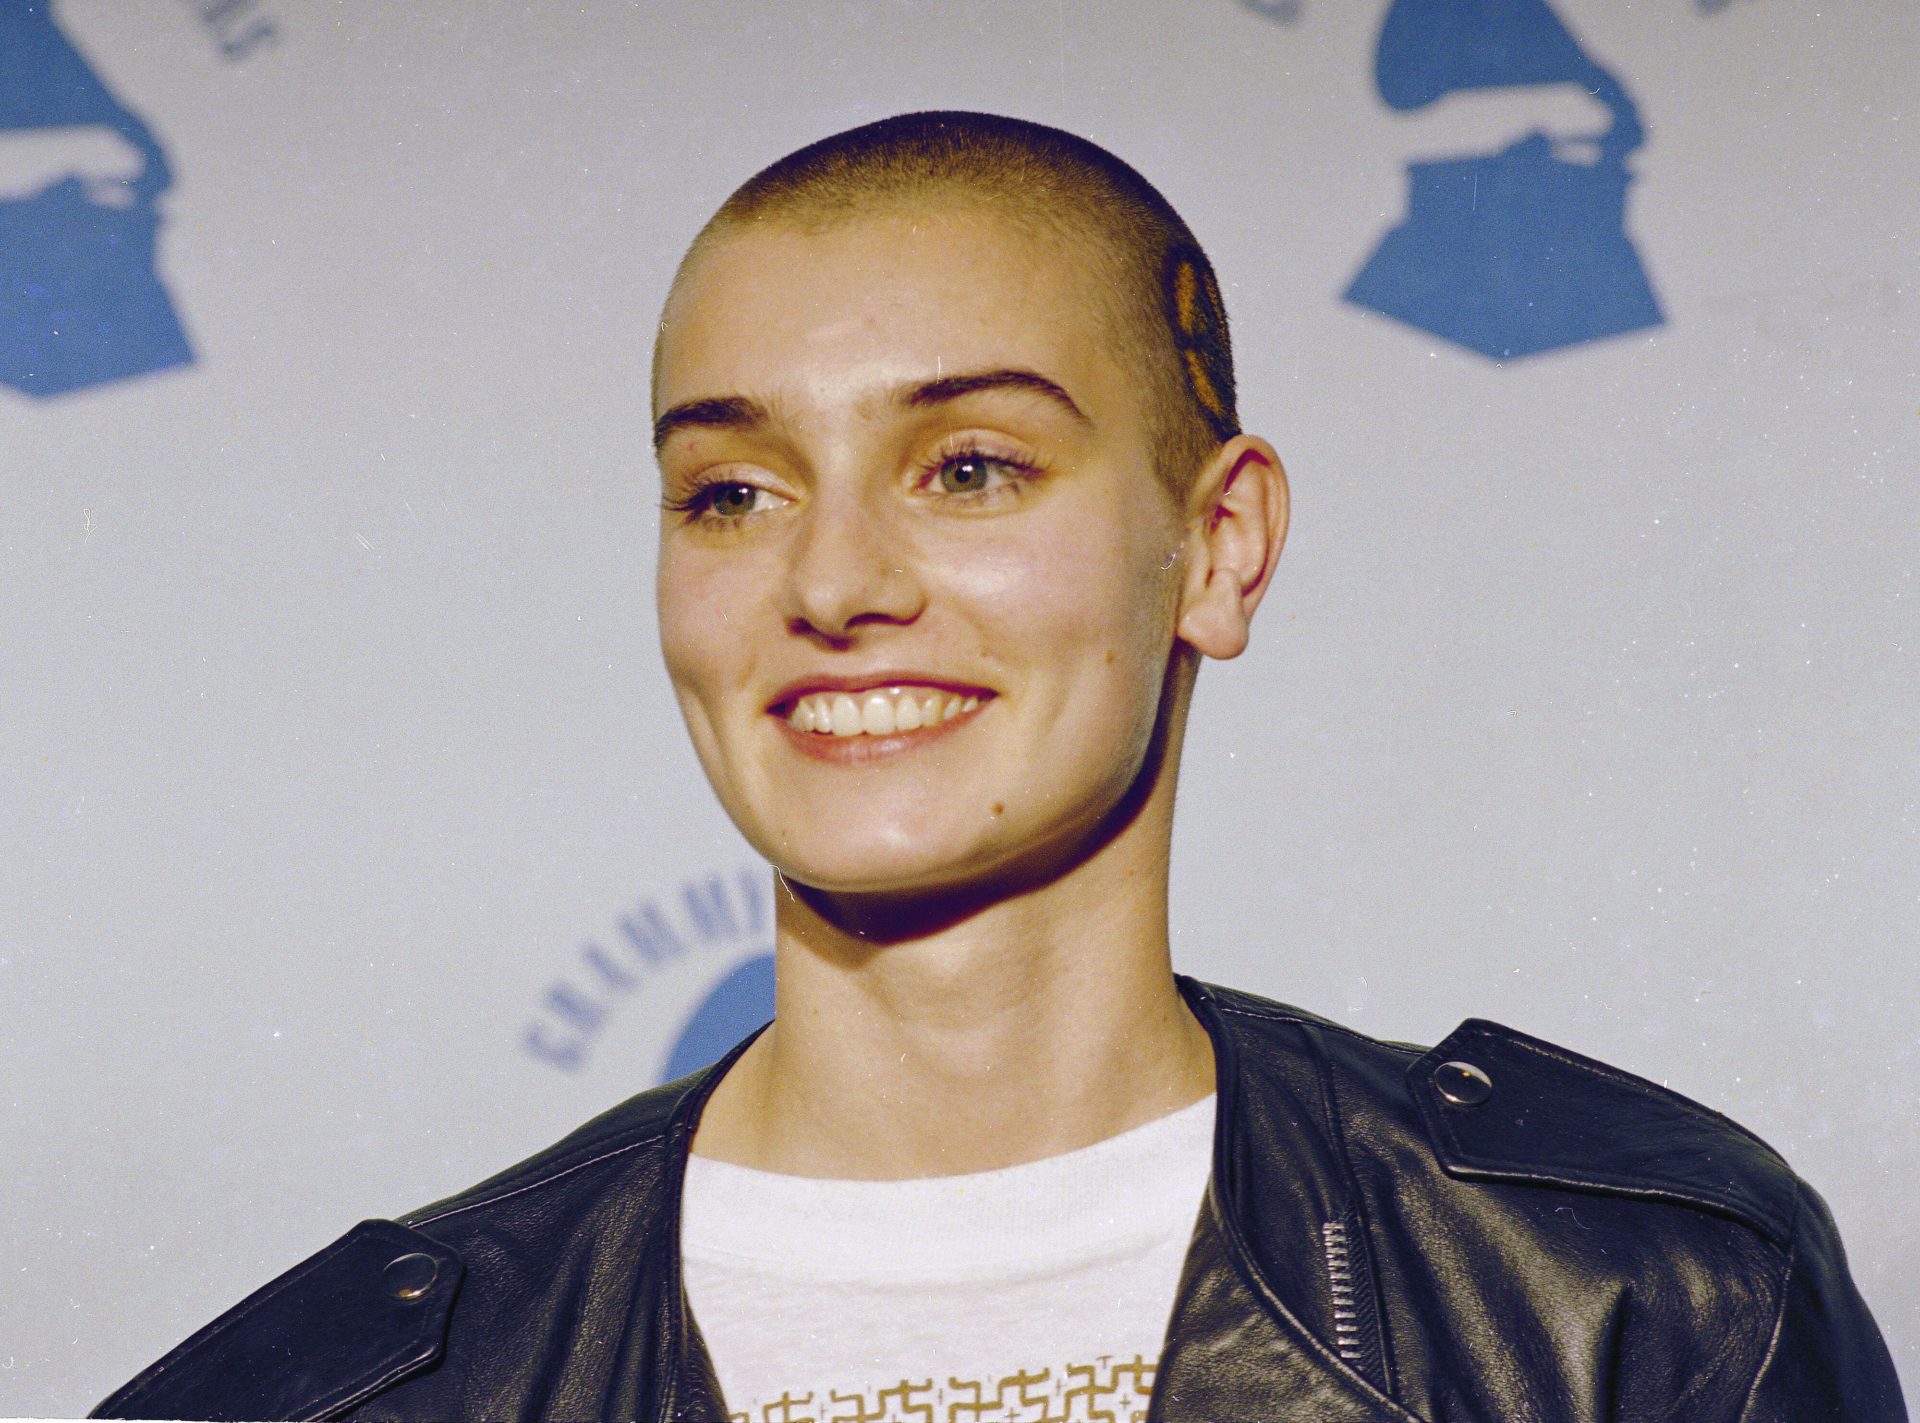 Sinead O'Connor at the Grammy Awards at New York's Radio City Music Hall, 22/02/1989. Image: AP Photo/Alamy